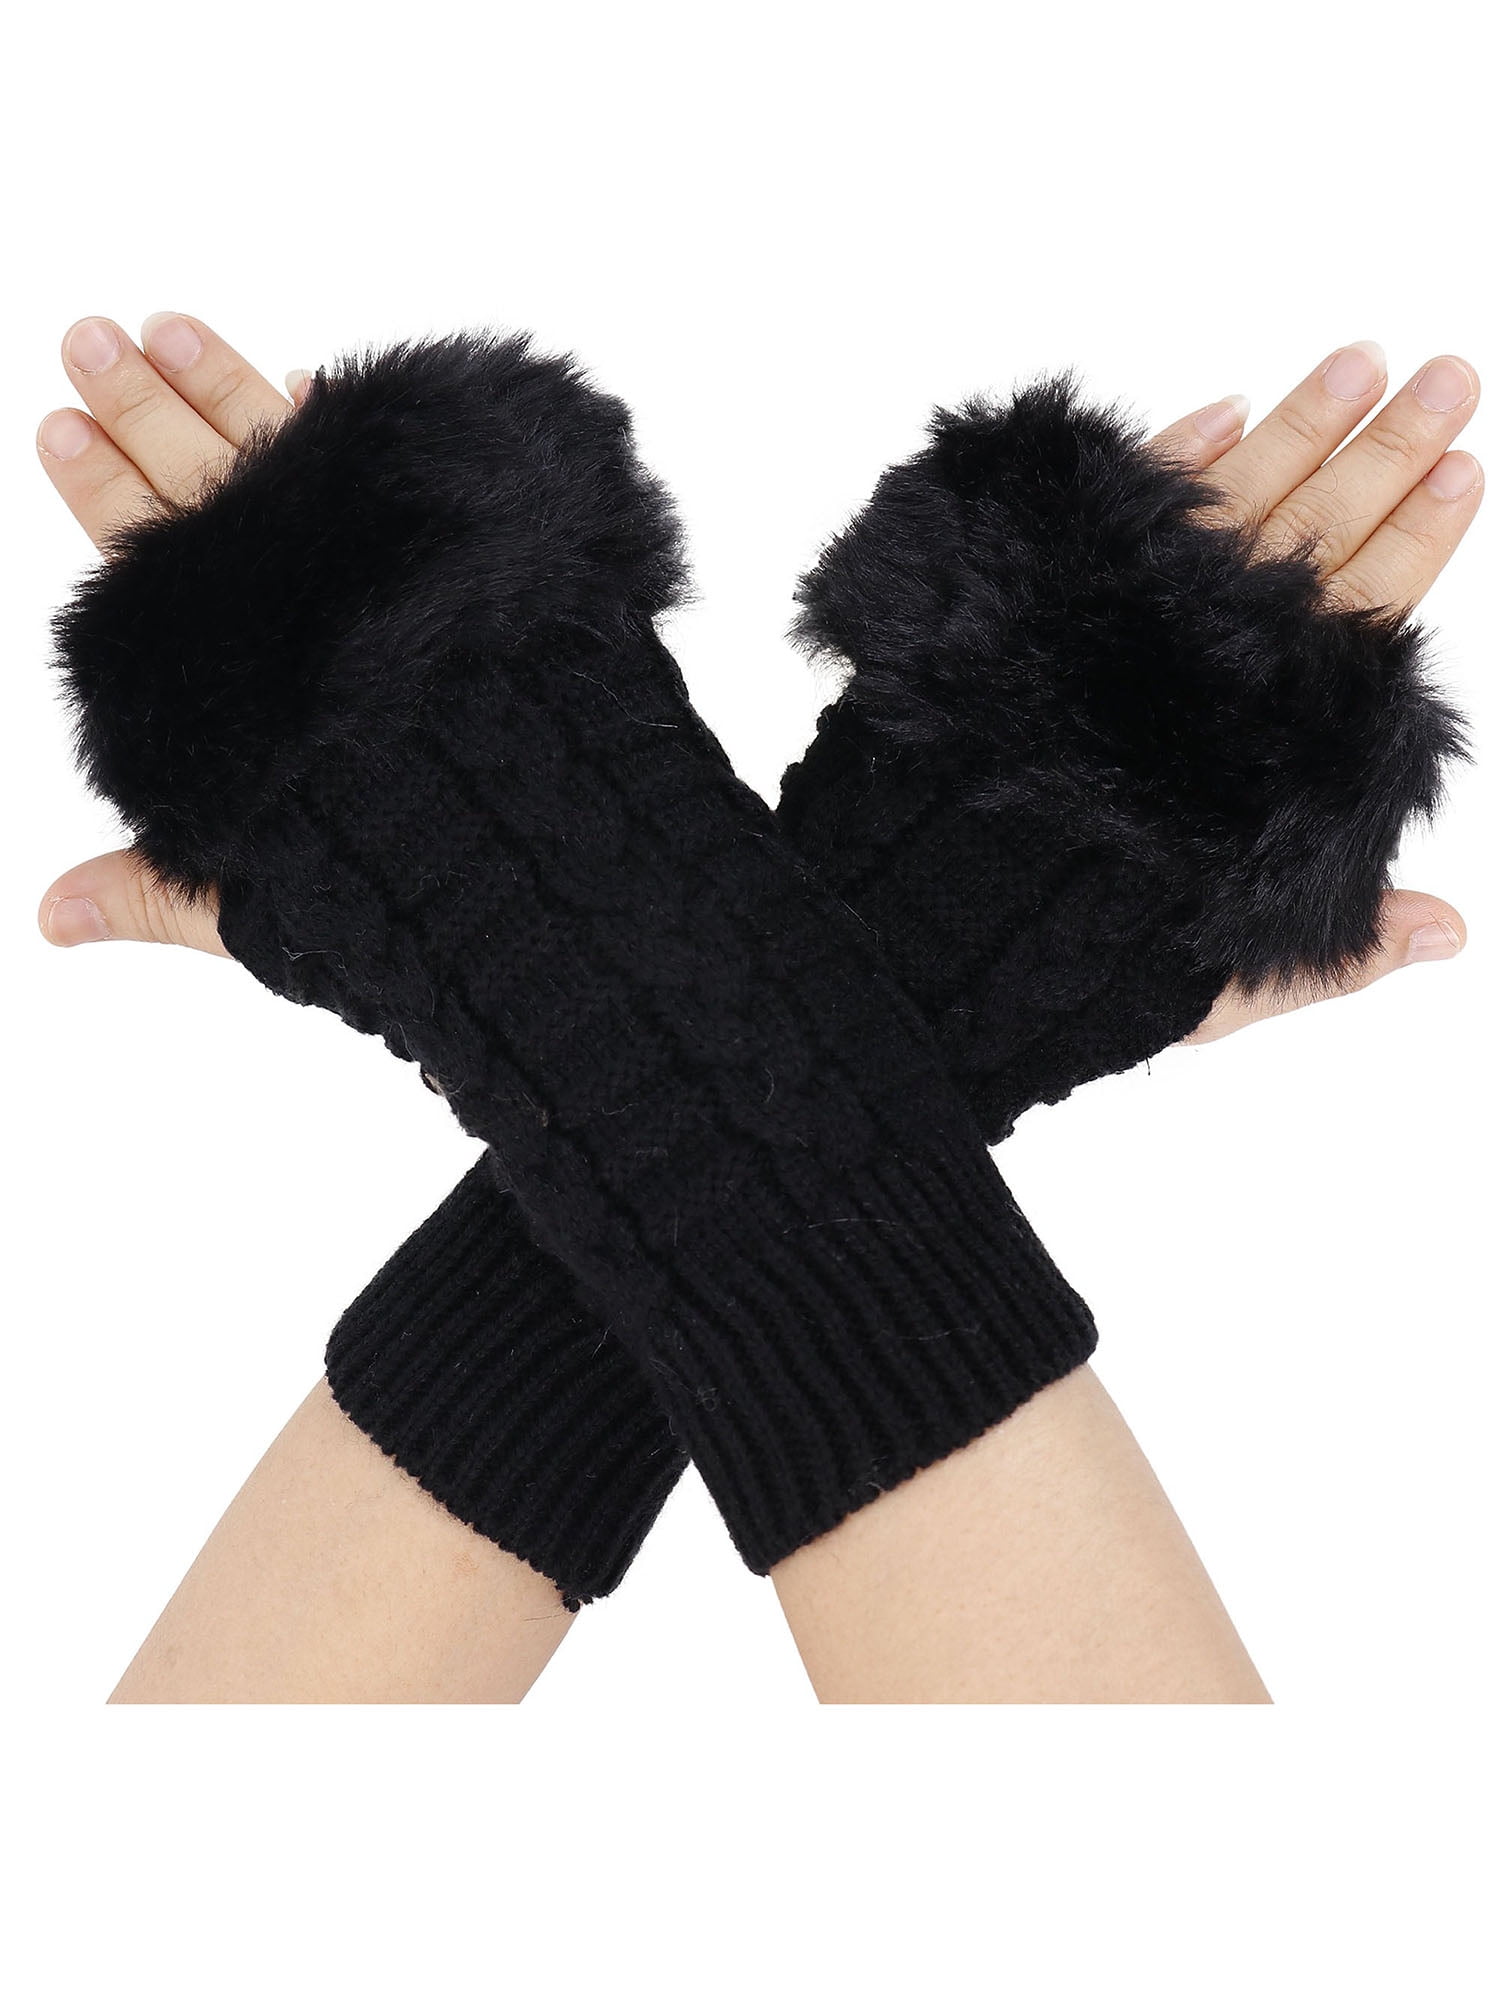 Women's Girls Arm Warmer Fingerless Short Knit Gloves With Faux Fur Mitts 